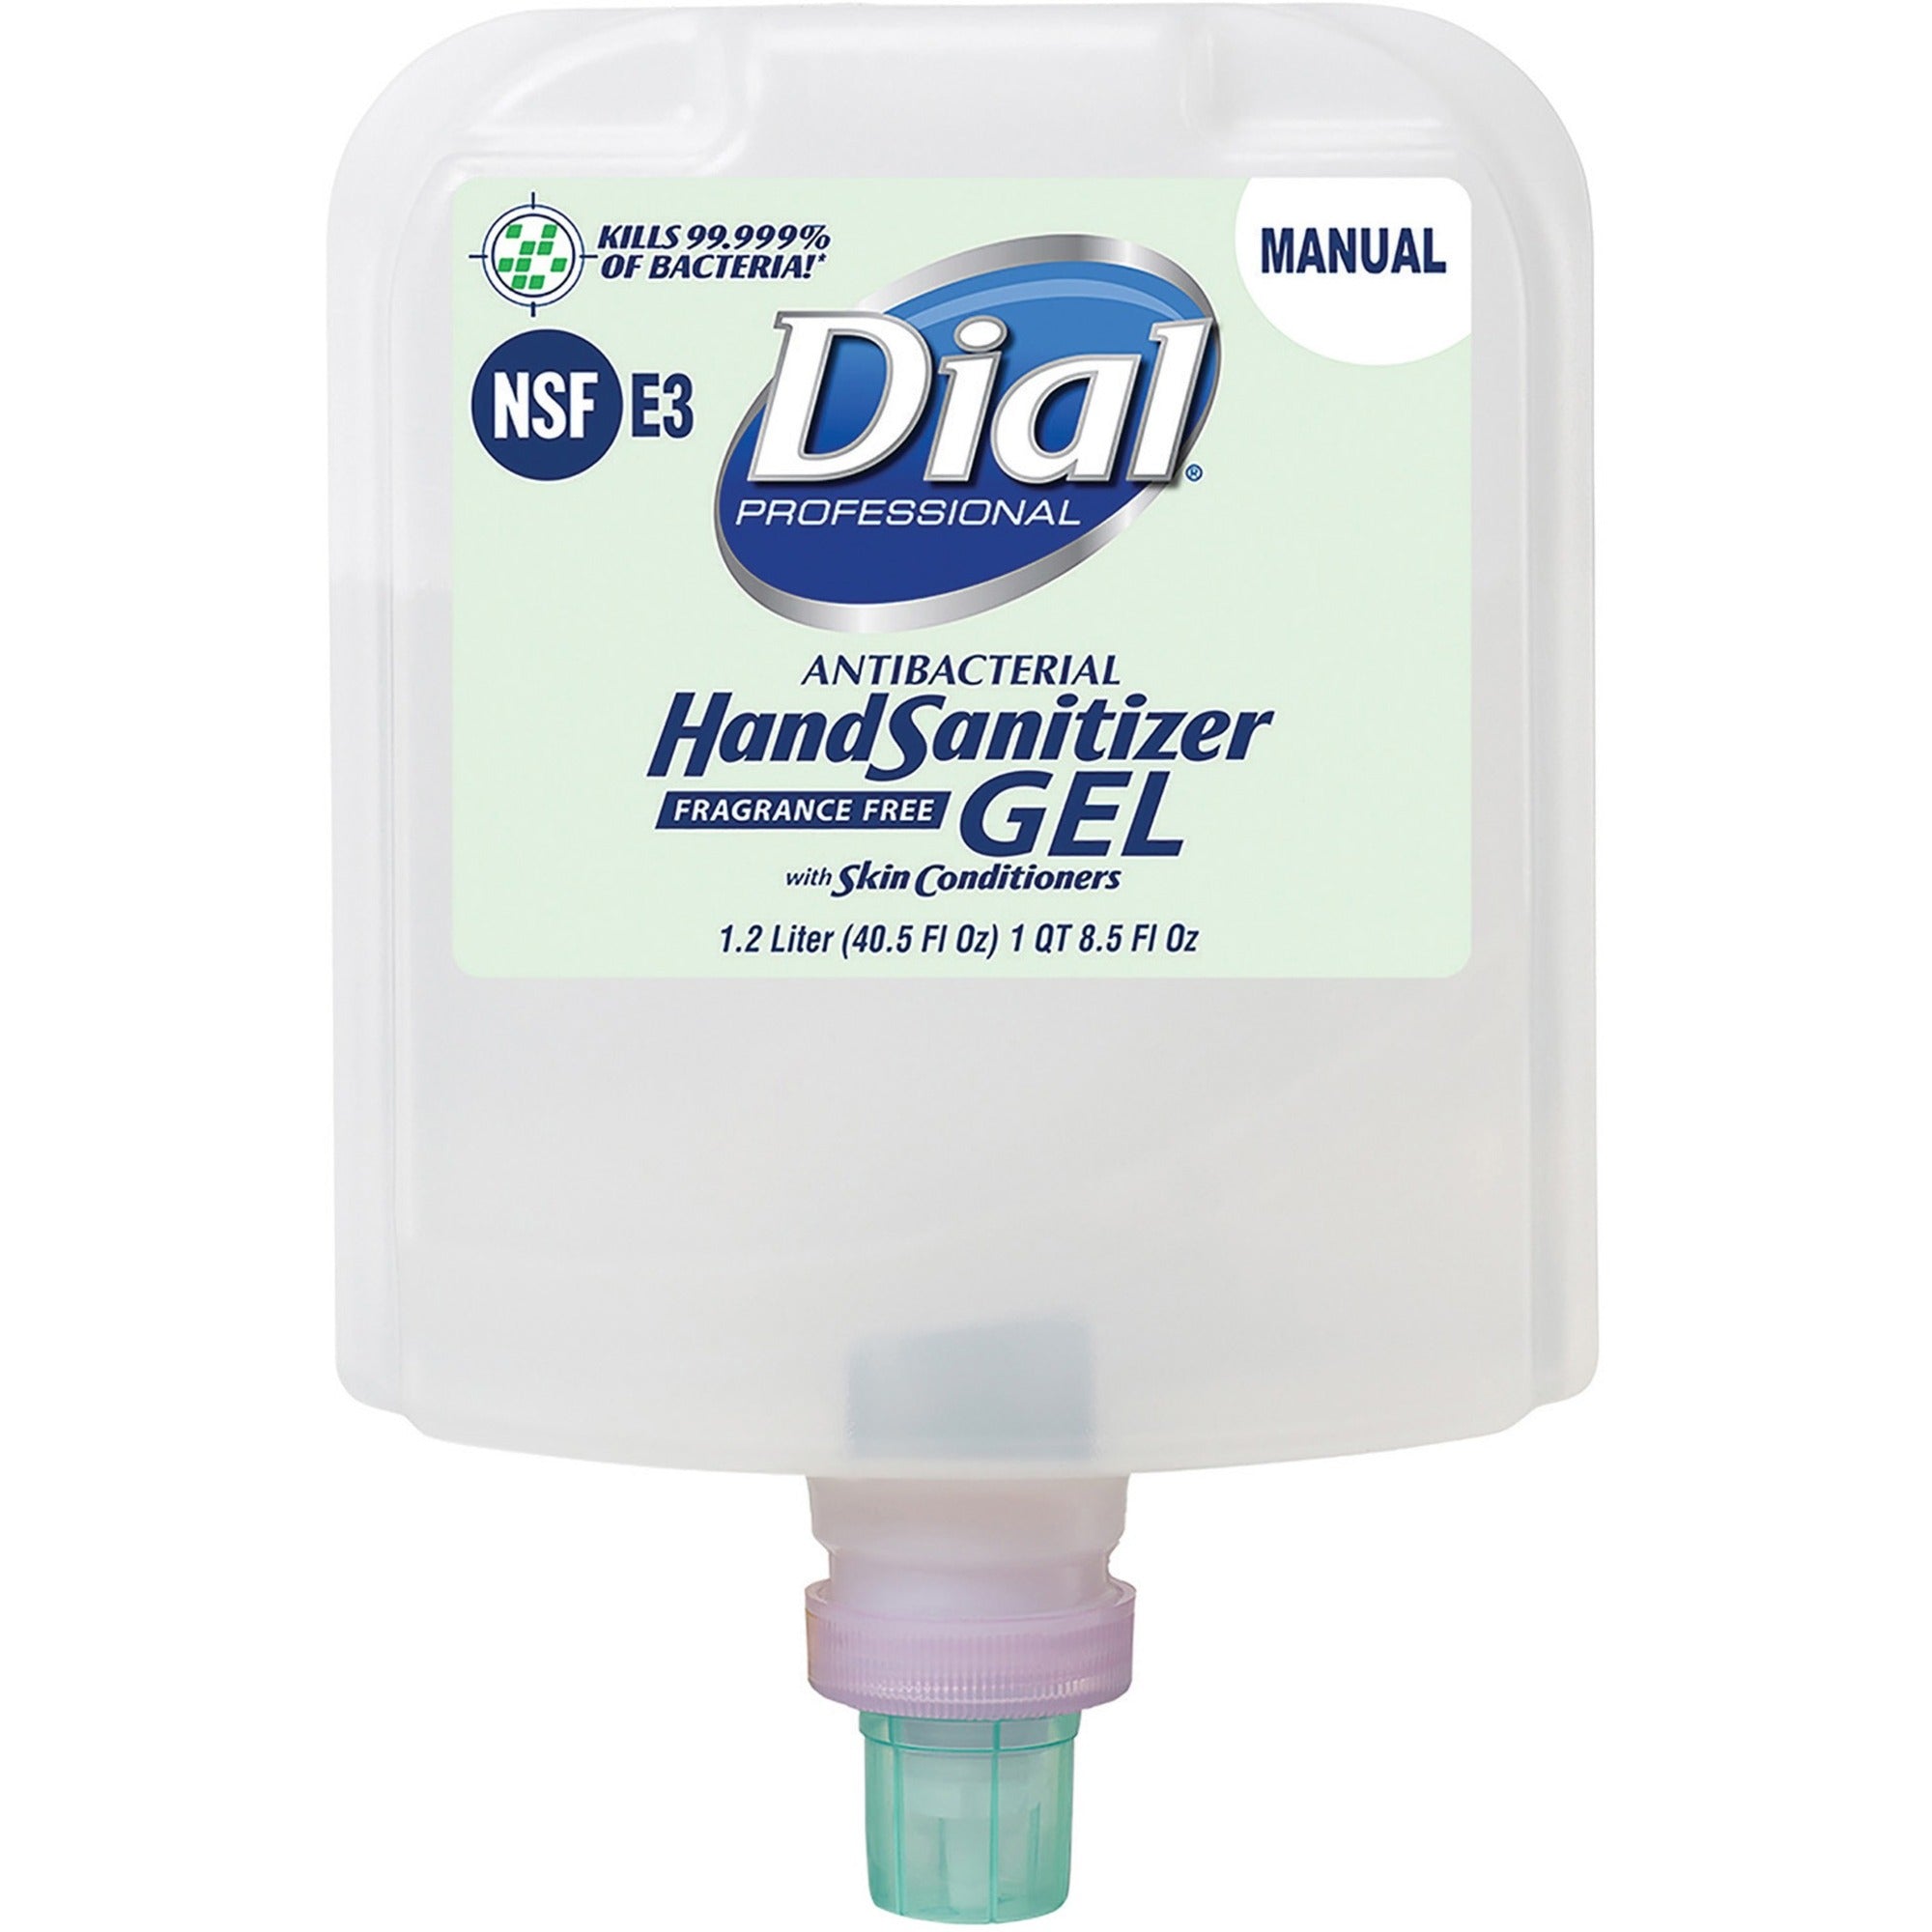 dial-hand-sanitizer-gel-refill-405-fl-oz-11977-ml-kill-germs-bacteria-remover-healthcare-school-office-restaurant-daycare-clear-fragrance-free-dye-free-1-each_dia19708 - 1